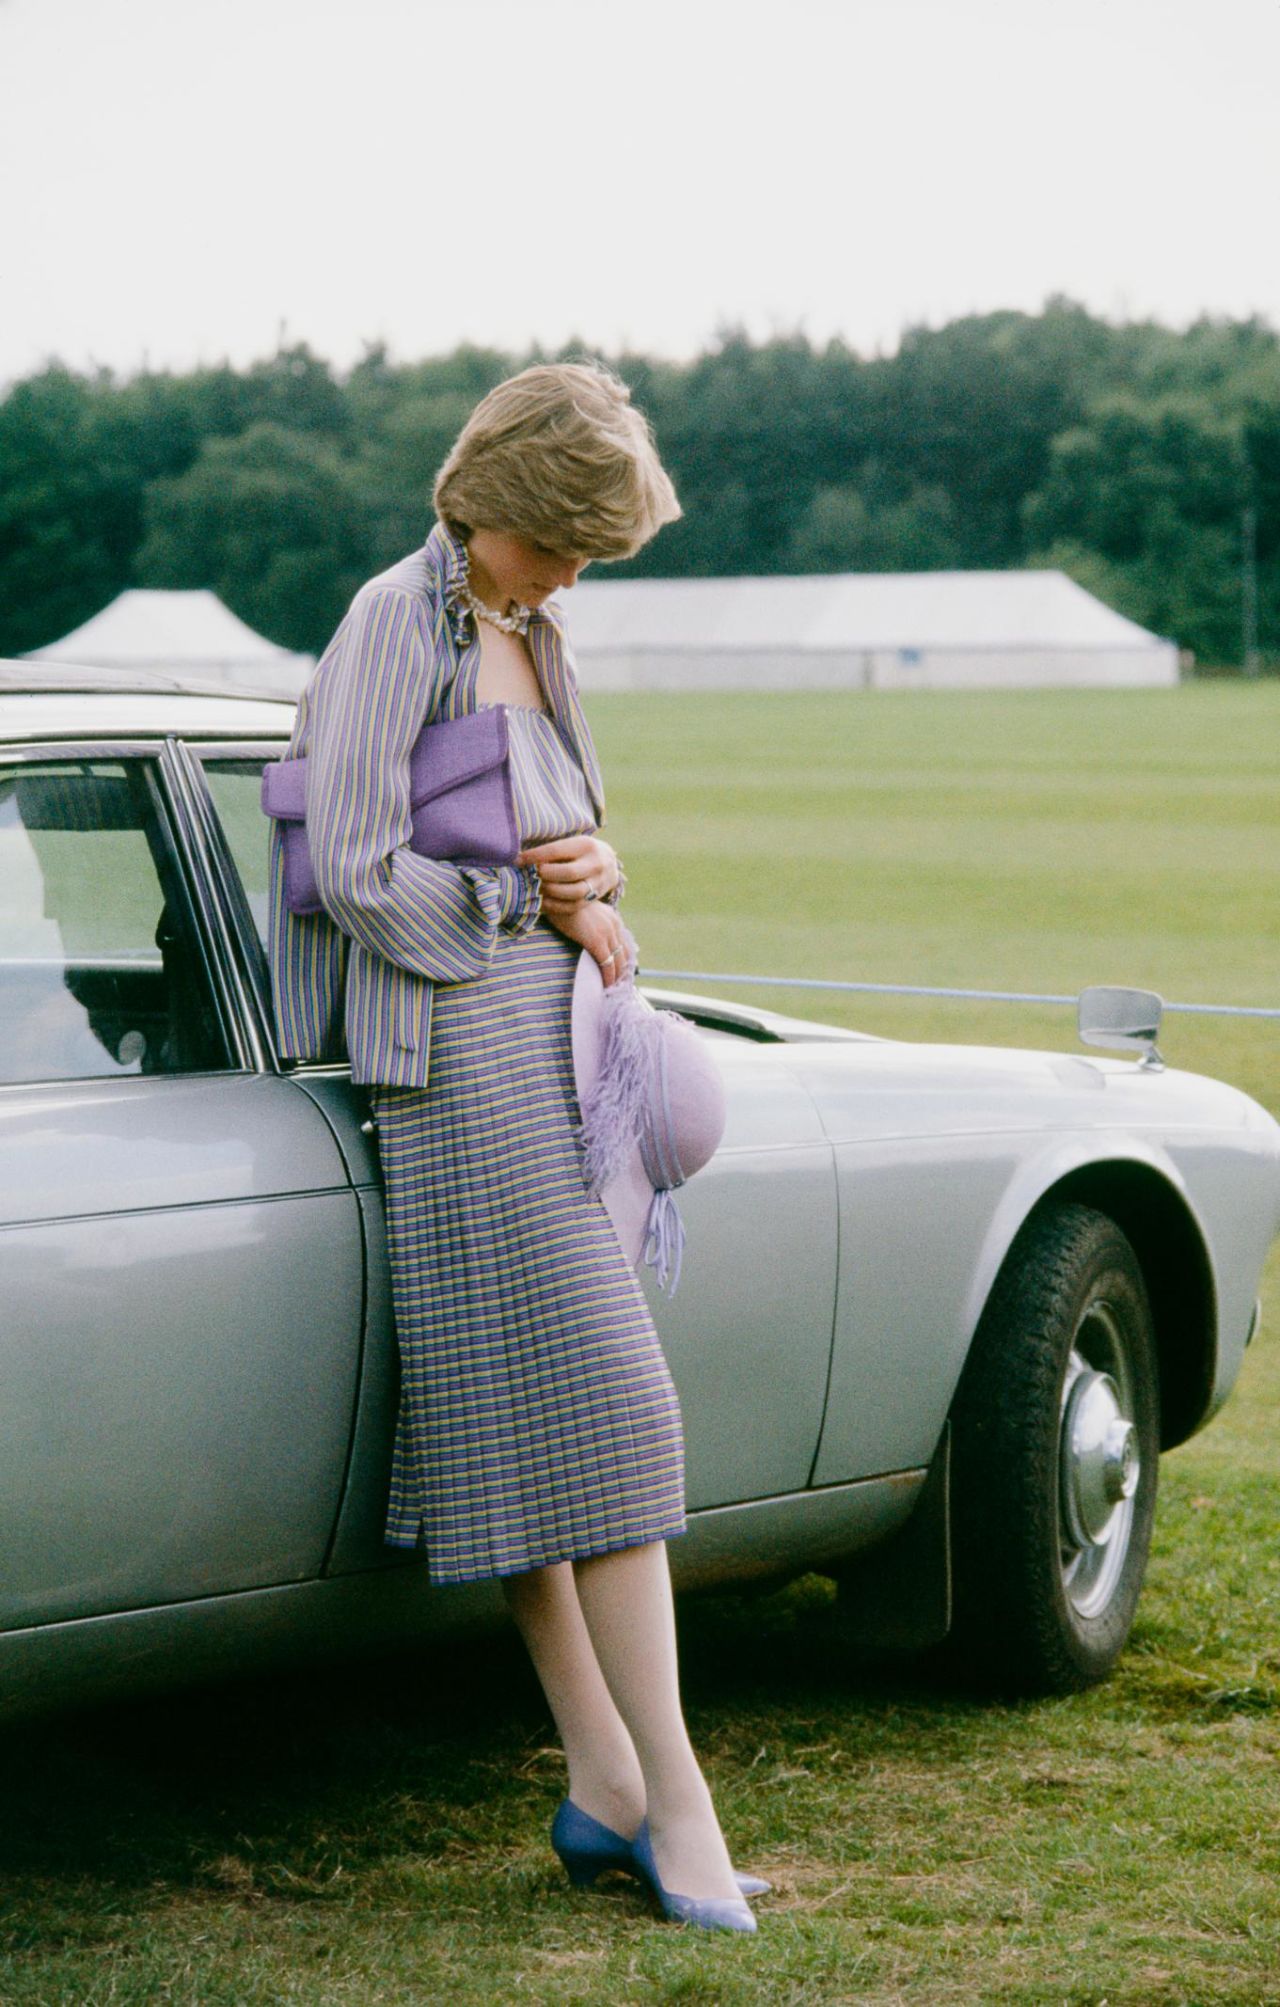 Lady Diana Spencer, soon to be Diana, Princess of Wales, has a relaxed moment along after the races at Ascot in 1981.